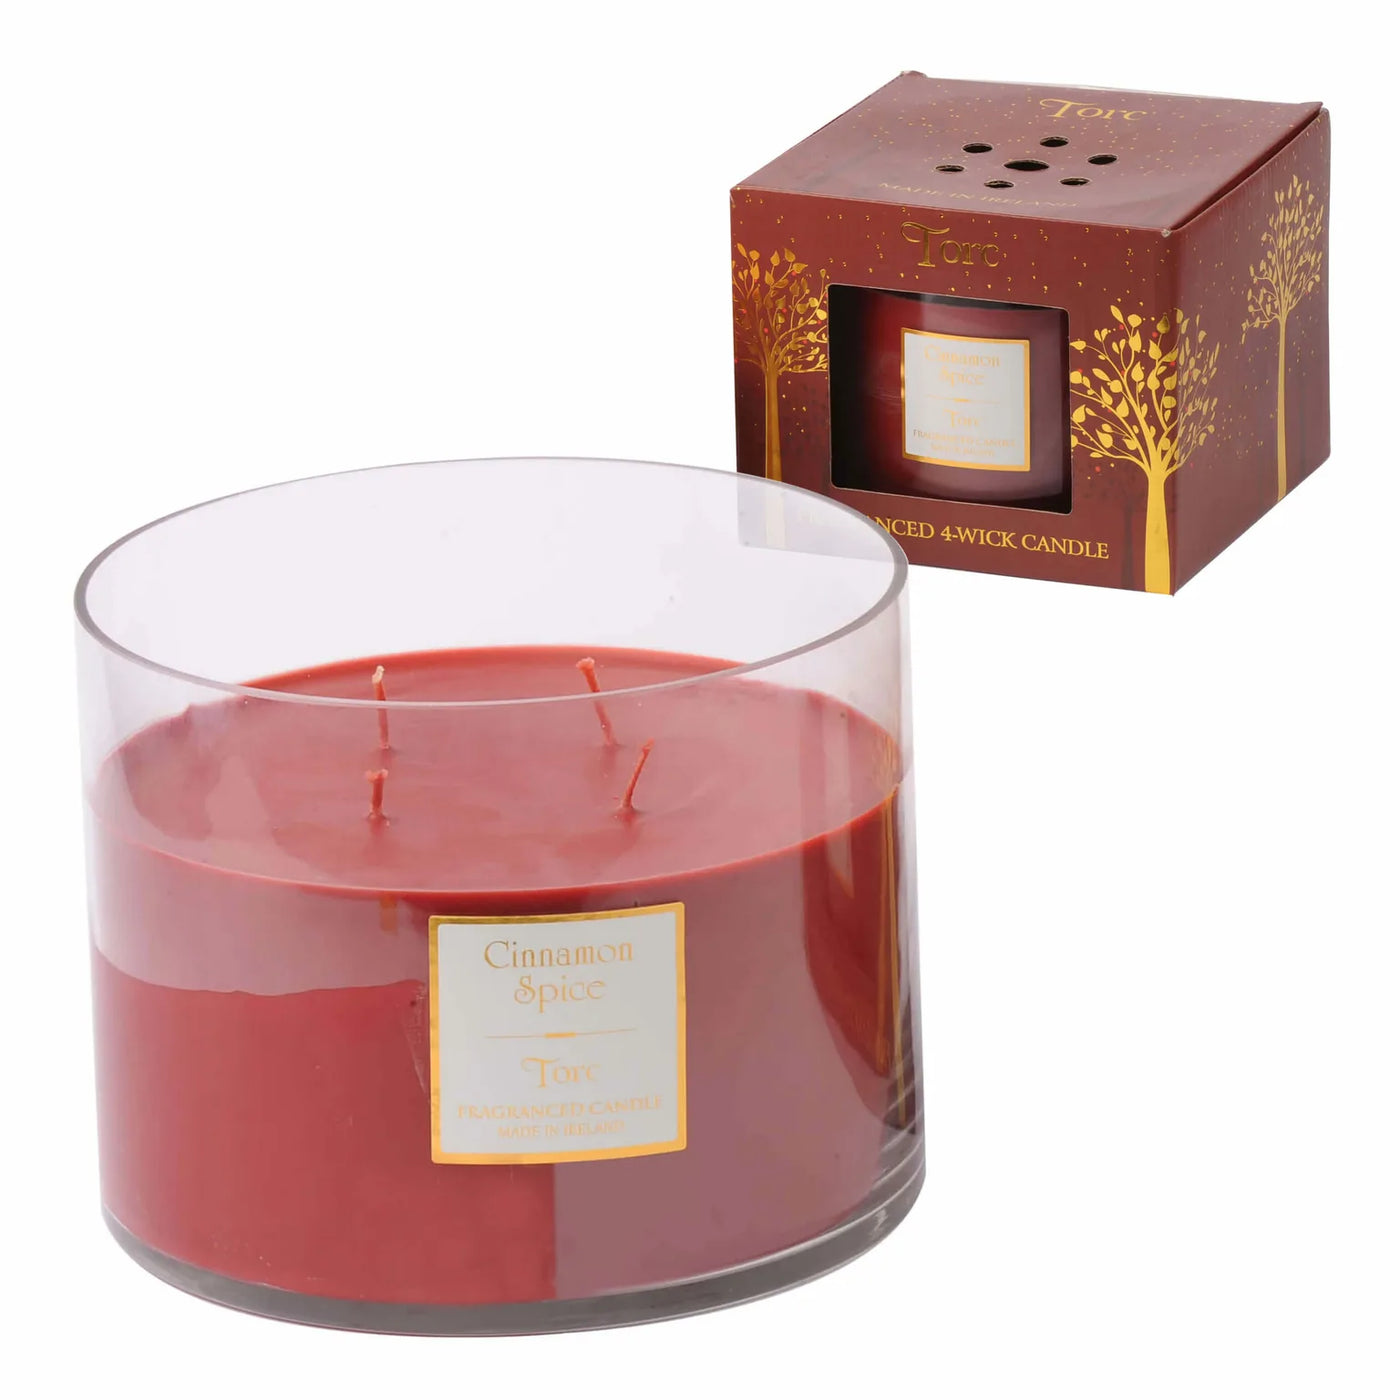 Torc Candles - Cinnamon Spice 4 Wick Luxury LARGE